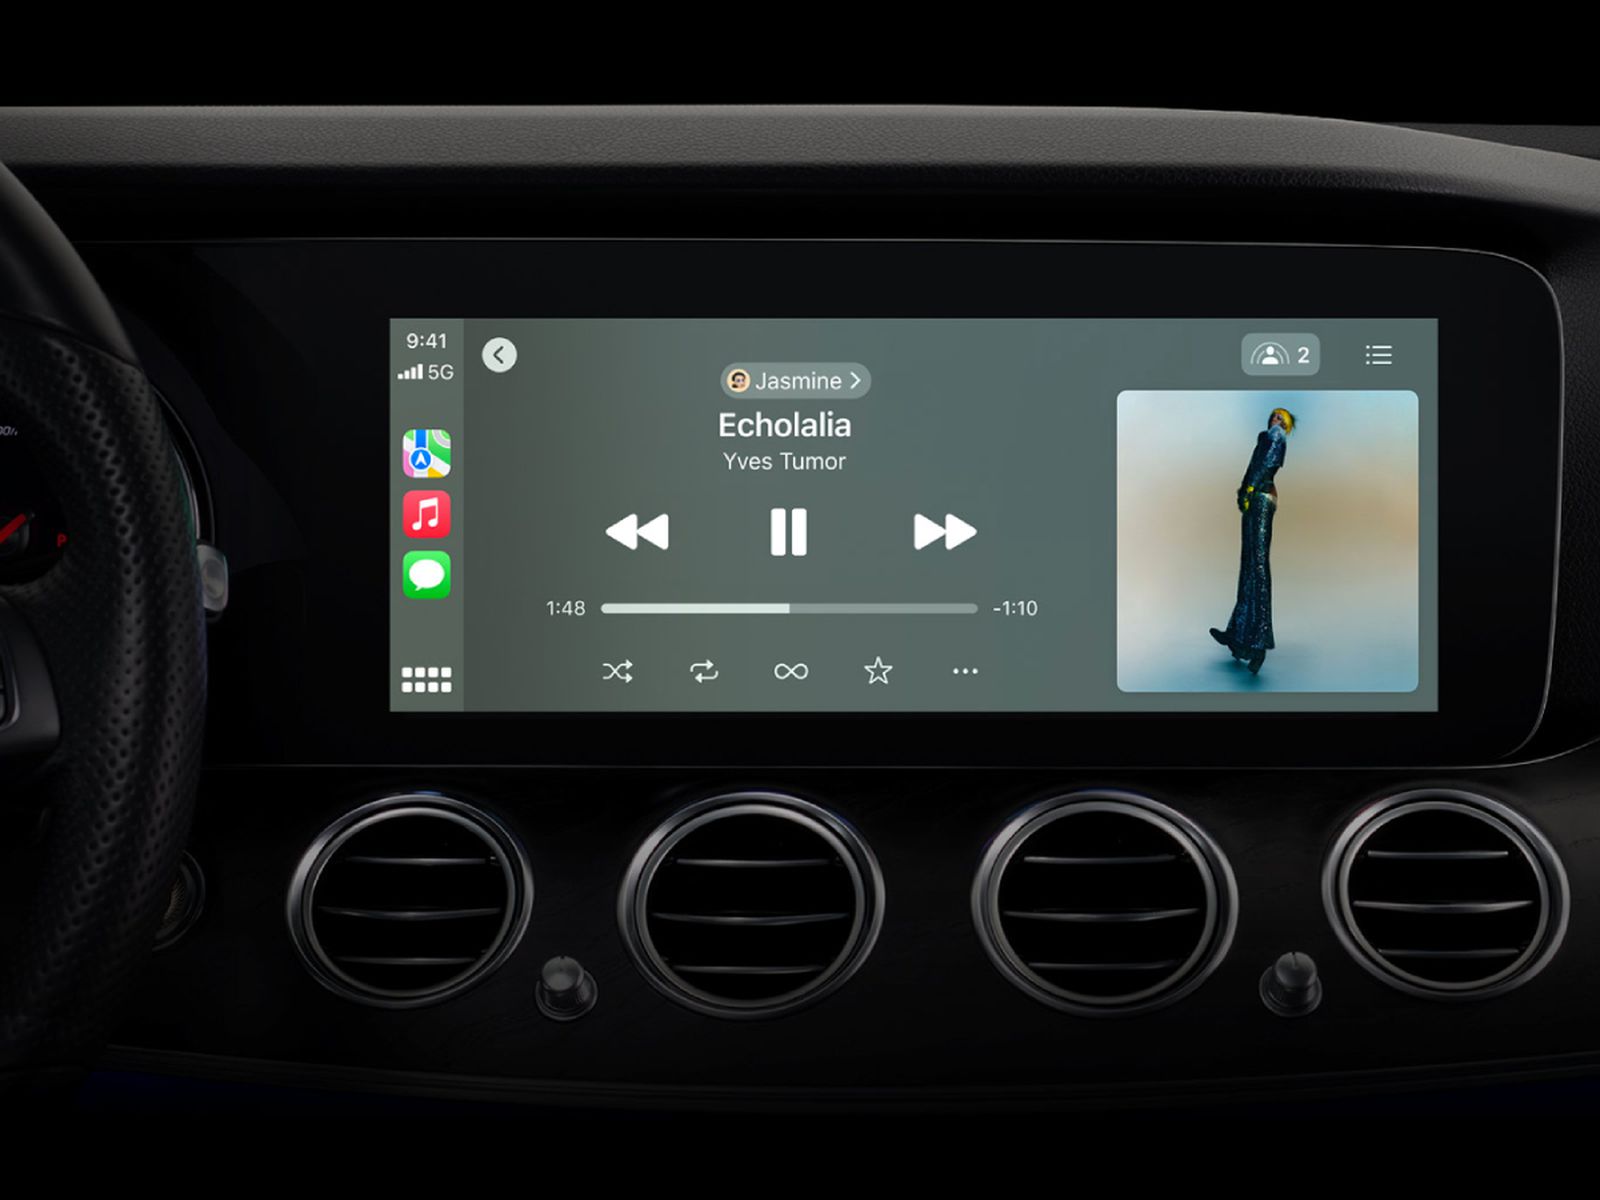 Apple's next generation CarPlay allows auto manufacturers to license the OS